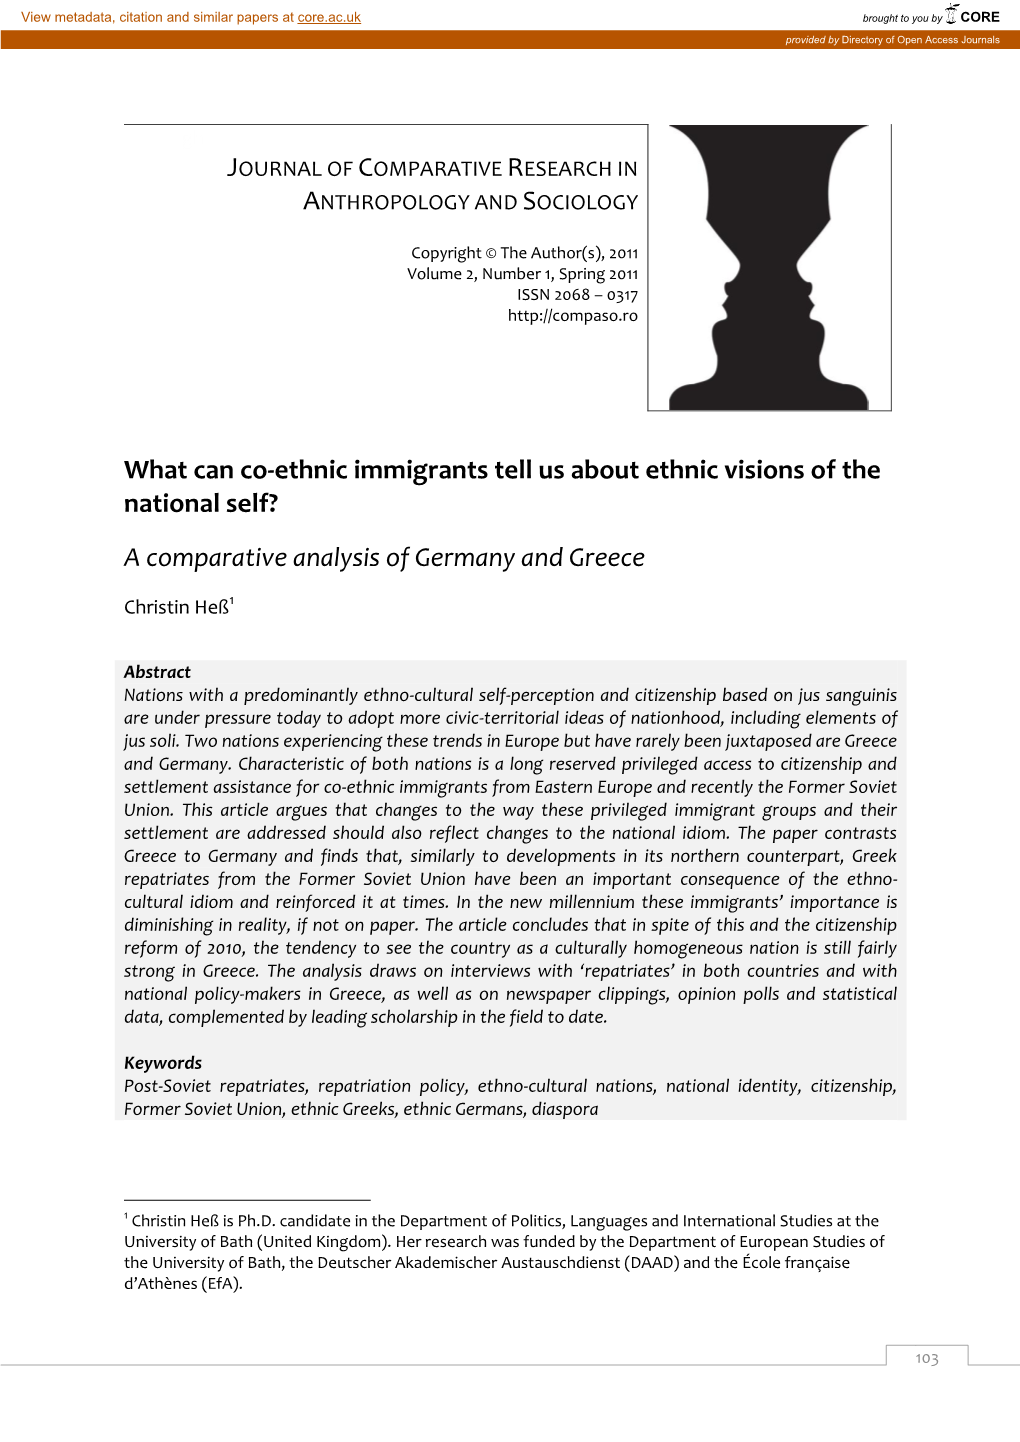 What Can Co-Ethnic Immigrants Tell Us About Ethnic Visions of the National Self? a Comparative Analysis of Germany and Greece